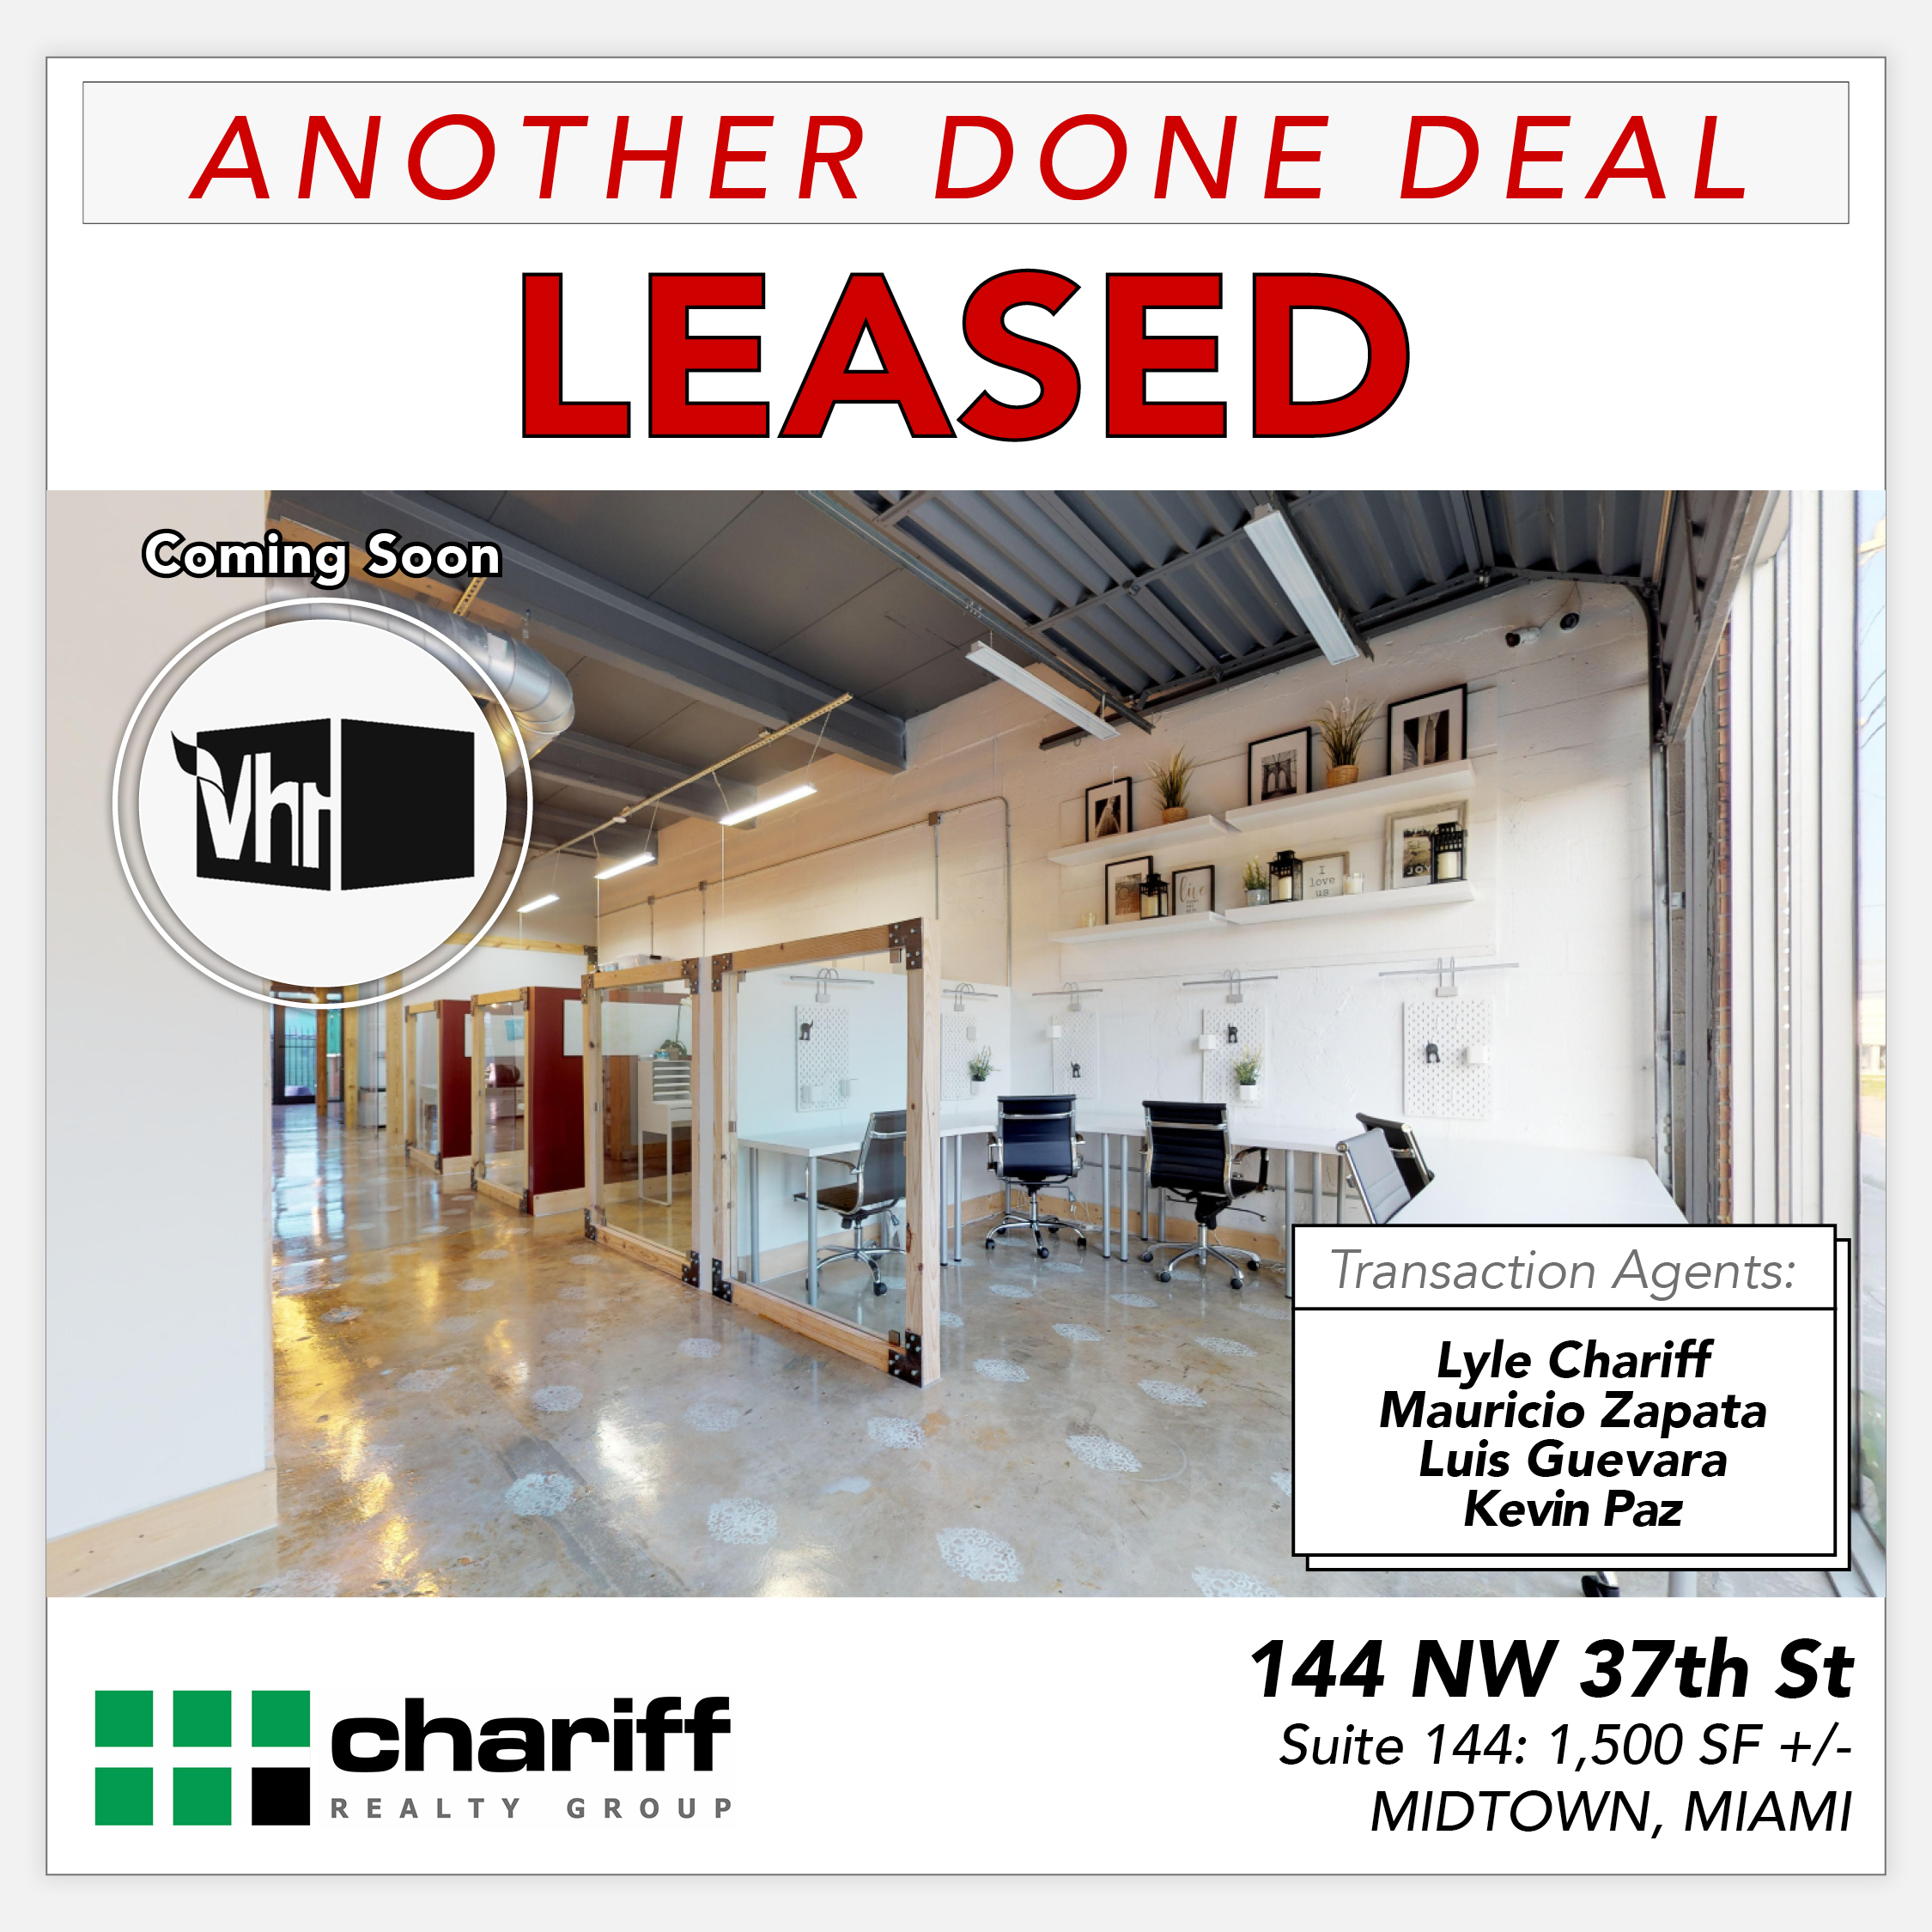 144 NW 37th St - Another Done Deal- Leased -Wynwood-Miami-Florida-33127-Chariff Realty Group